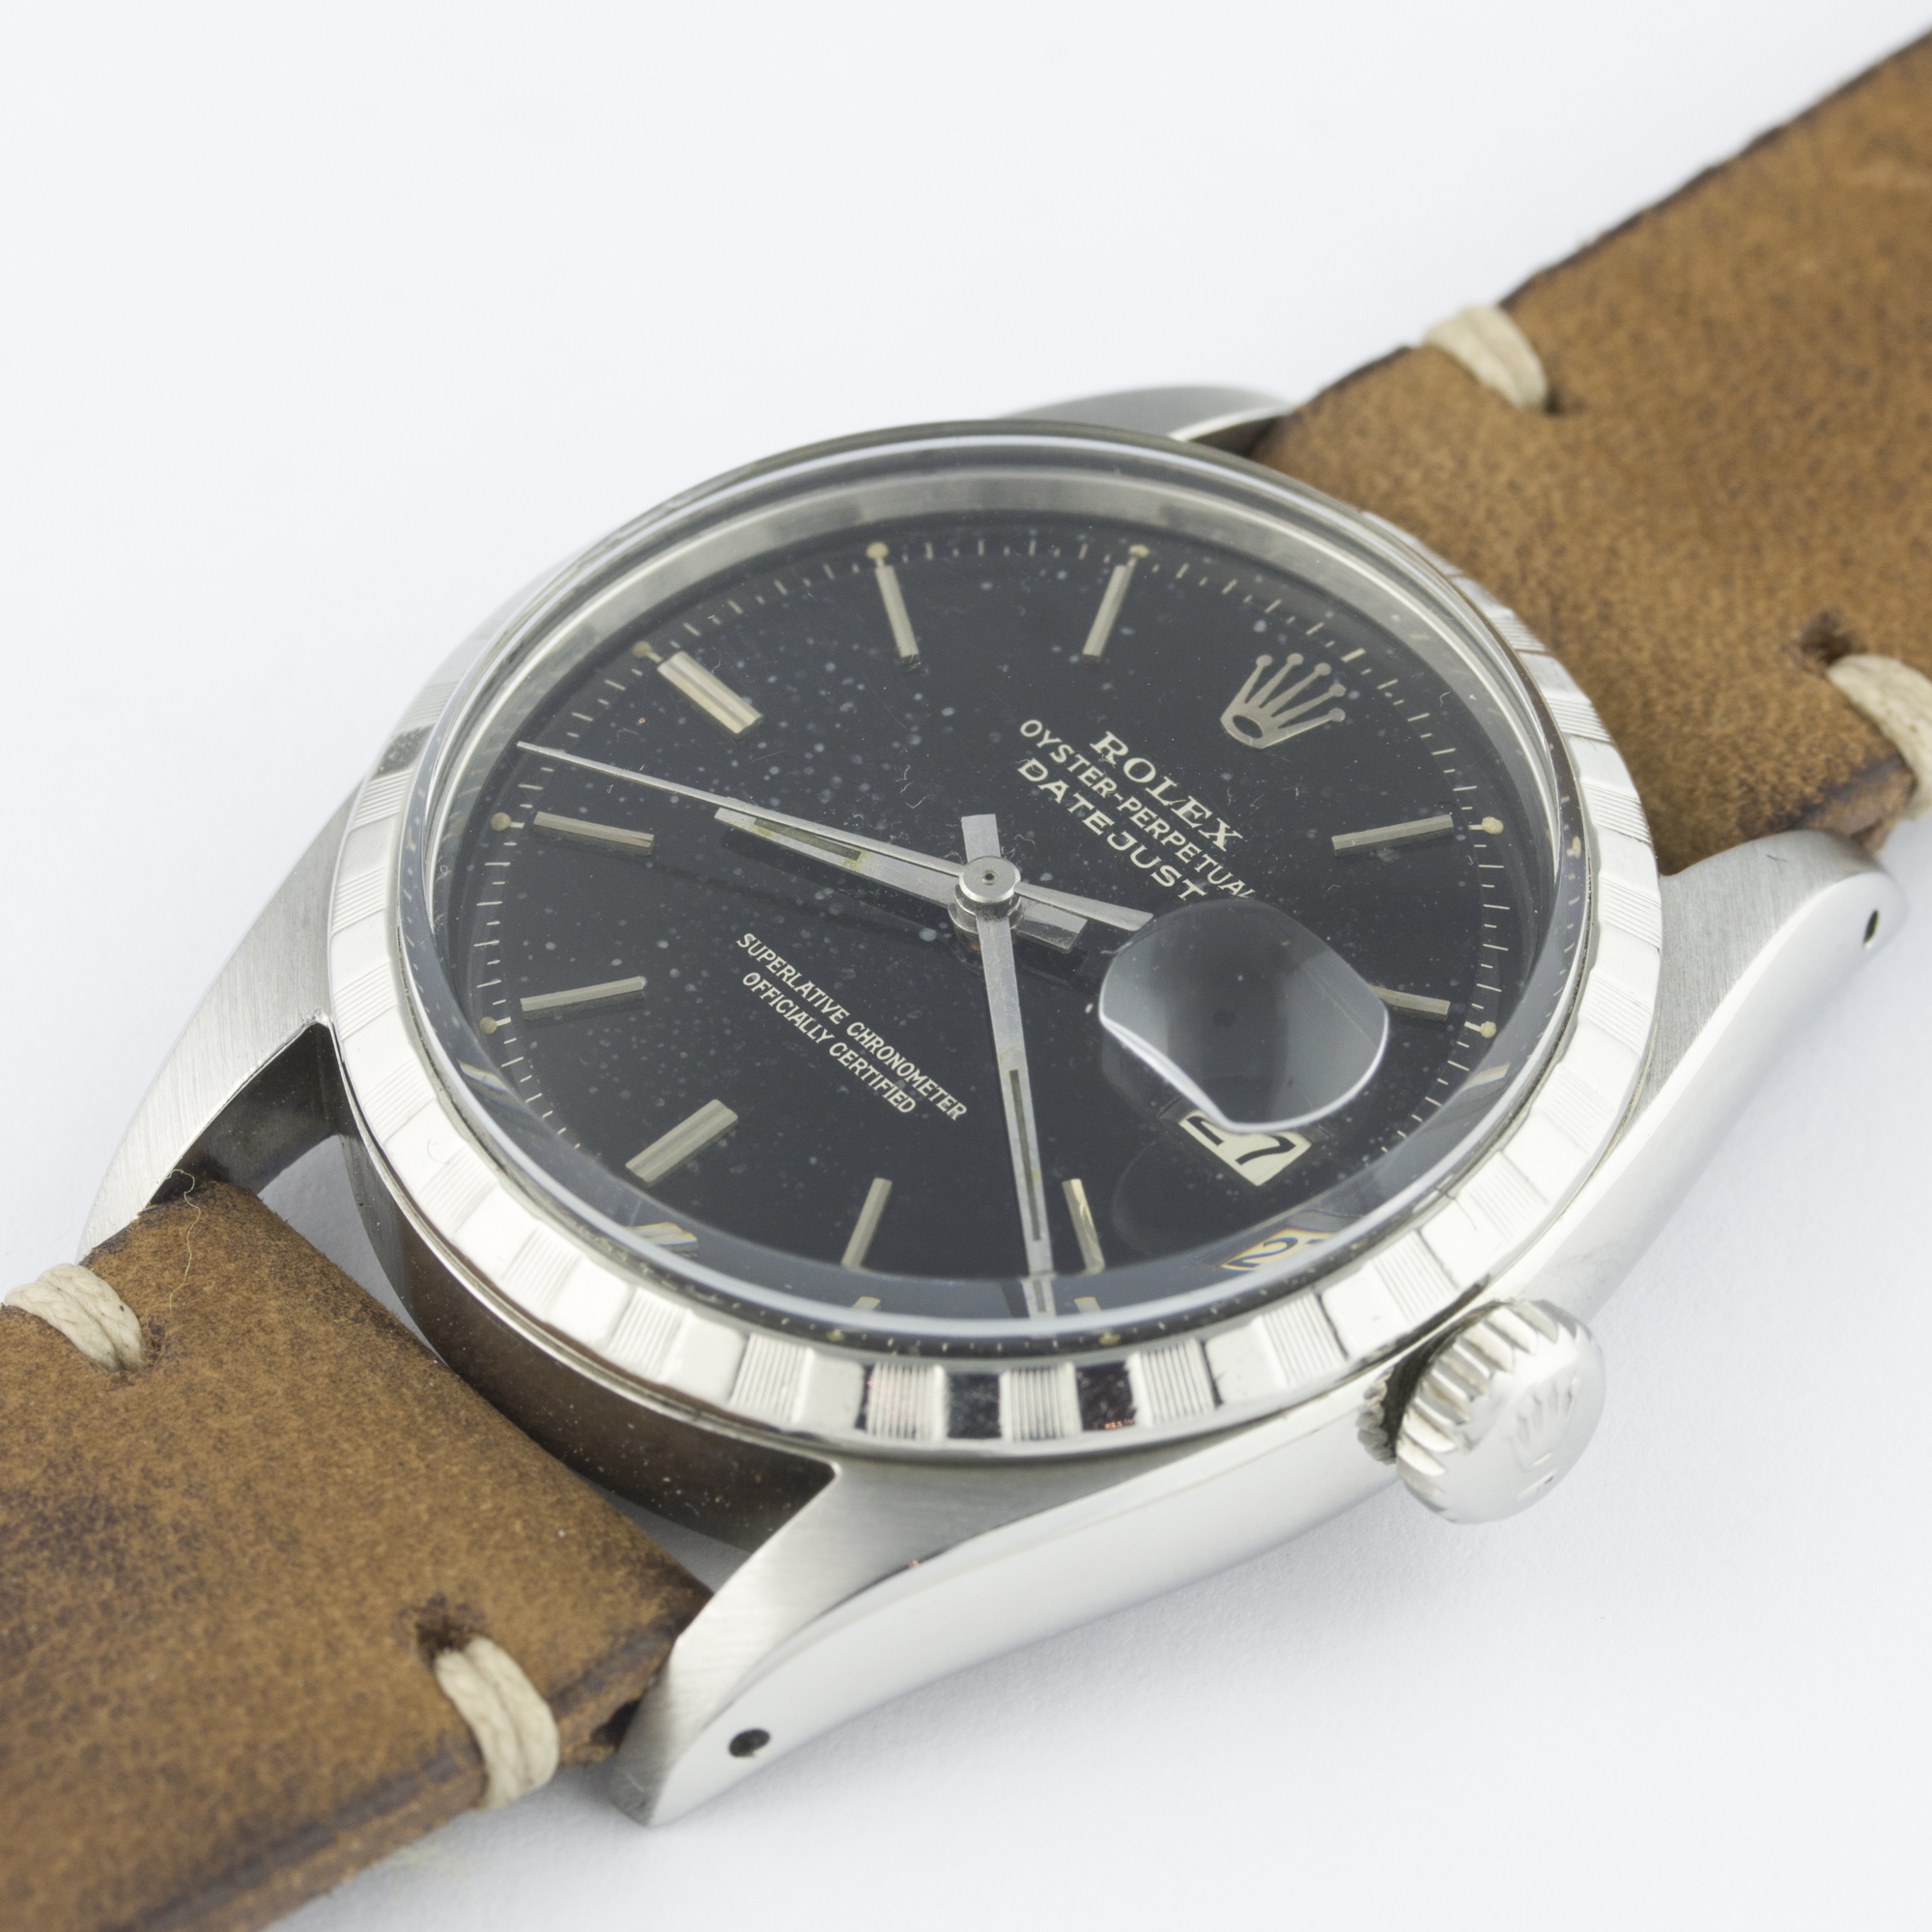 A RARE GENTLEMAN'S STAINLESS STEEL ROLEX OYSTER PERPETUAL DATEJUST WRIST WATCH CIRCA 1960, REF. 6605 - Image 4 of 9